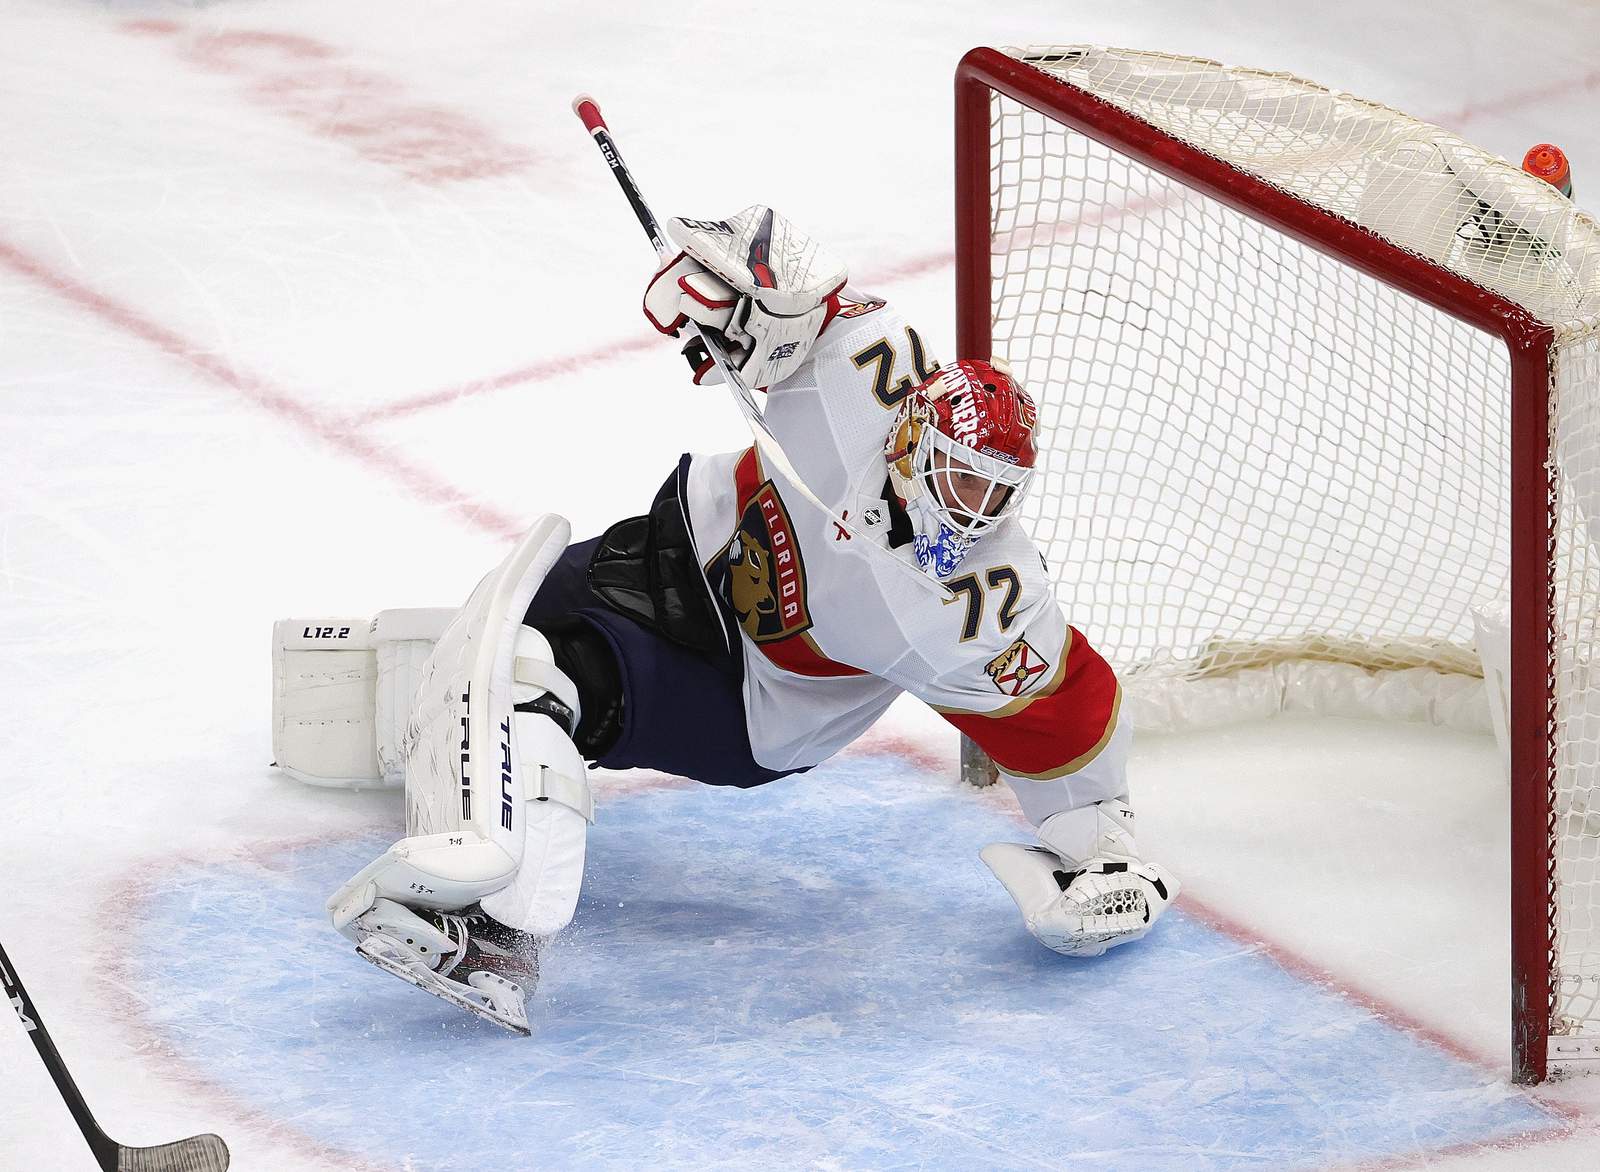 Staal scores twice, Hurricanes rally past Panthers 5-2